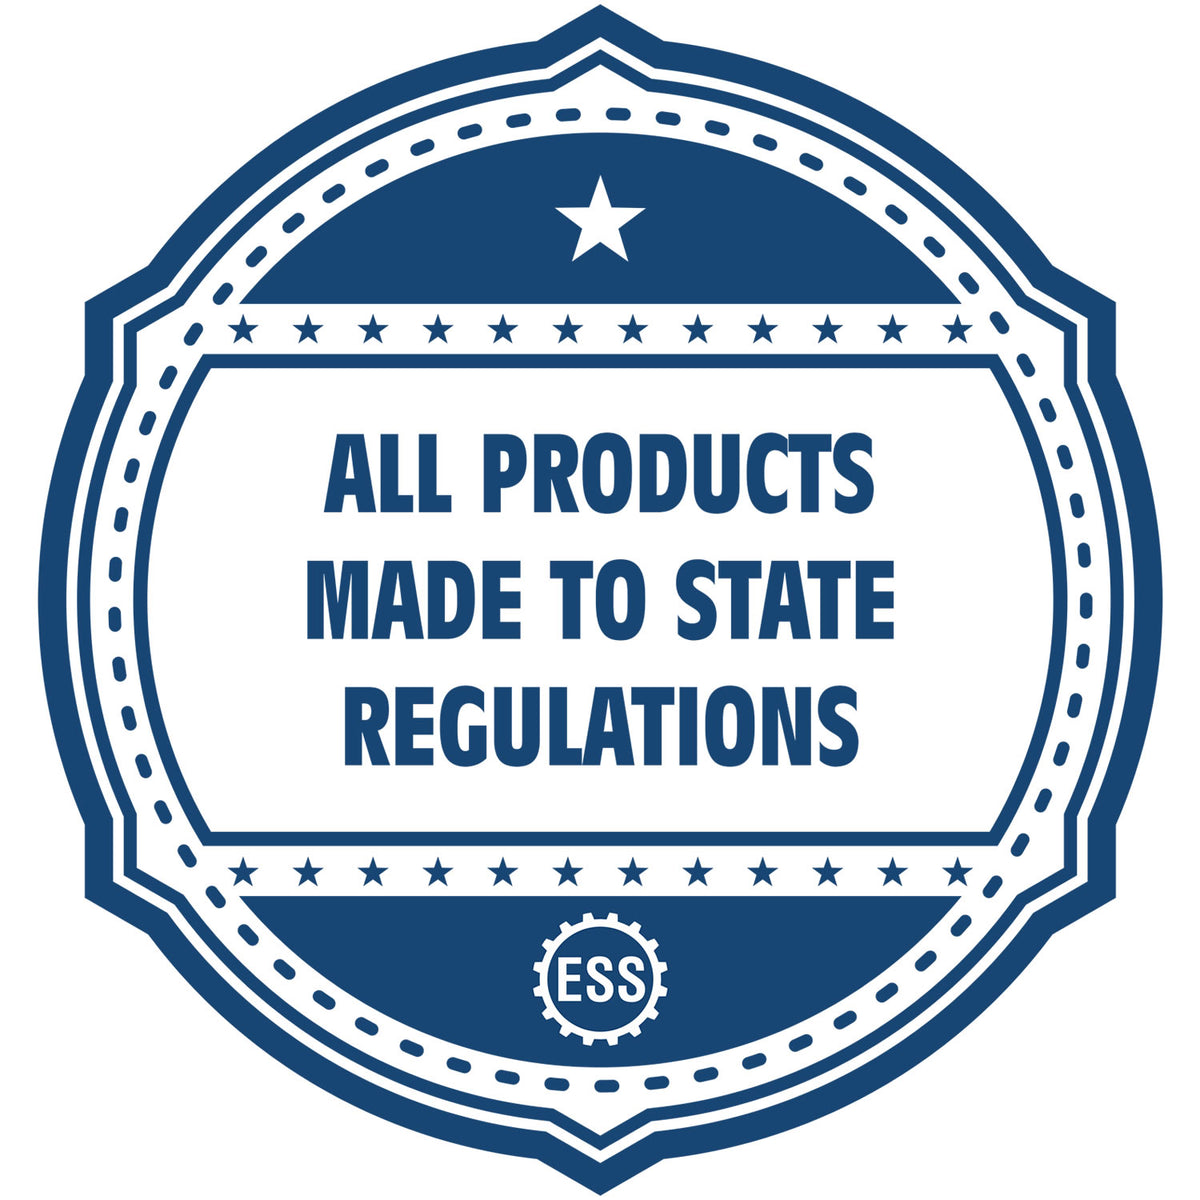 An icon or badge element for the Slim Pre-Inked Guam Landscape Architect Seal Stamp showing that this product is made in compliance with state regulations.